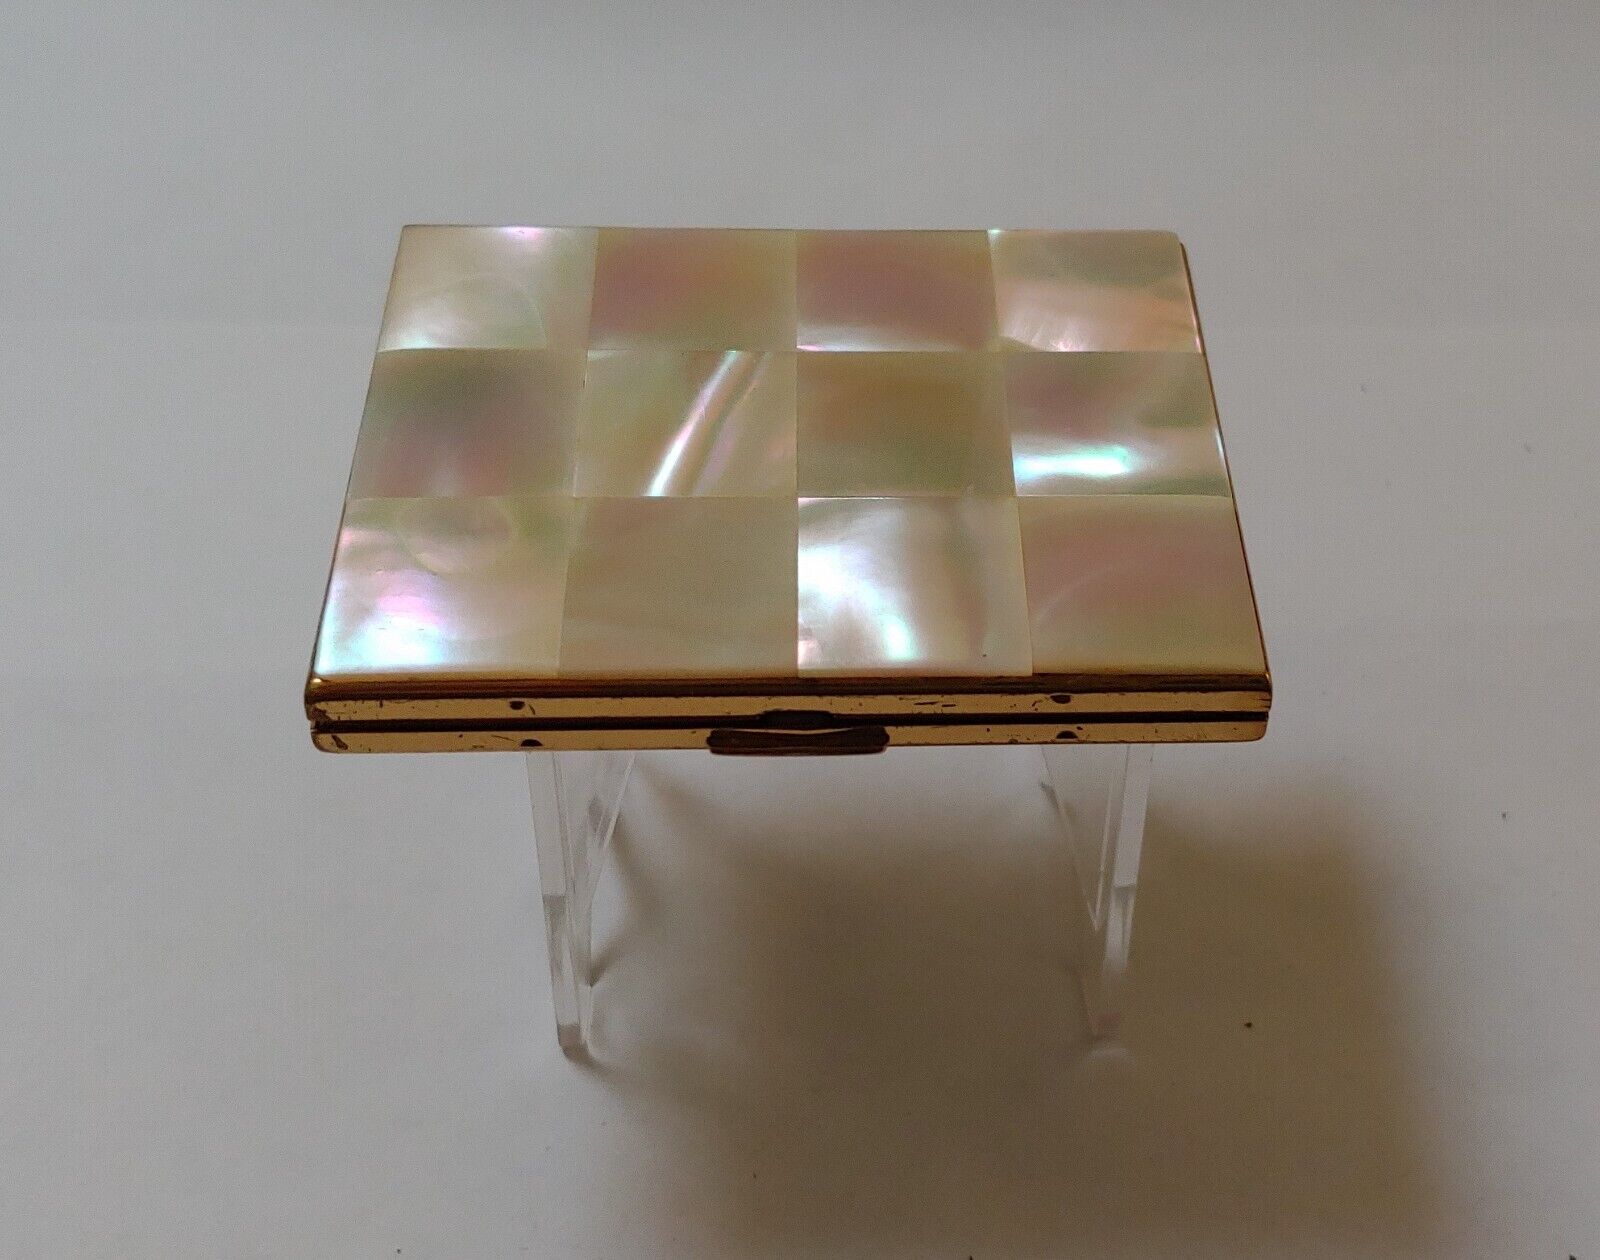 ELGIN American Mother of Pearl/Goldtone Compact from the 1940s